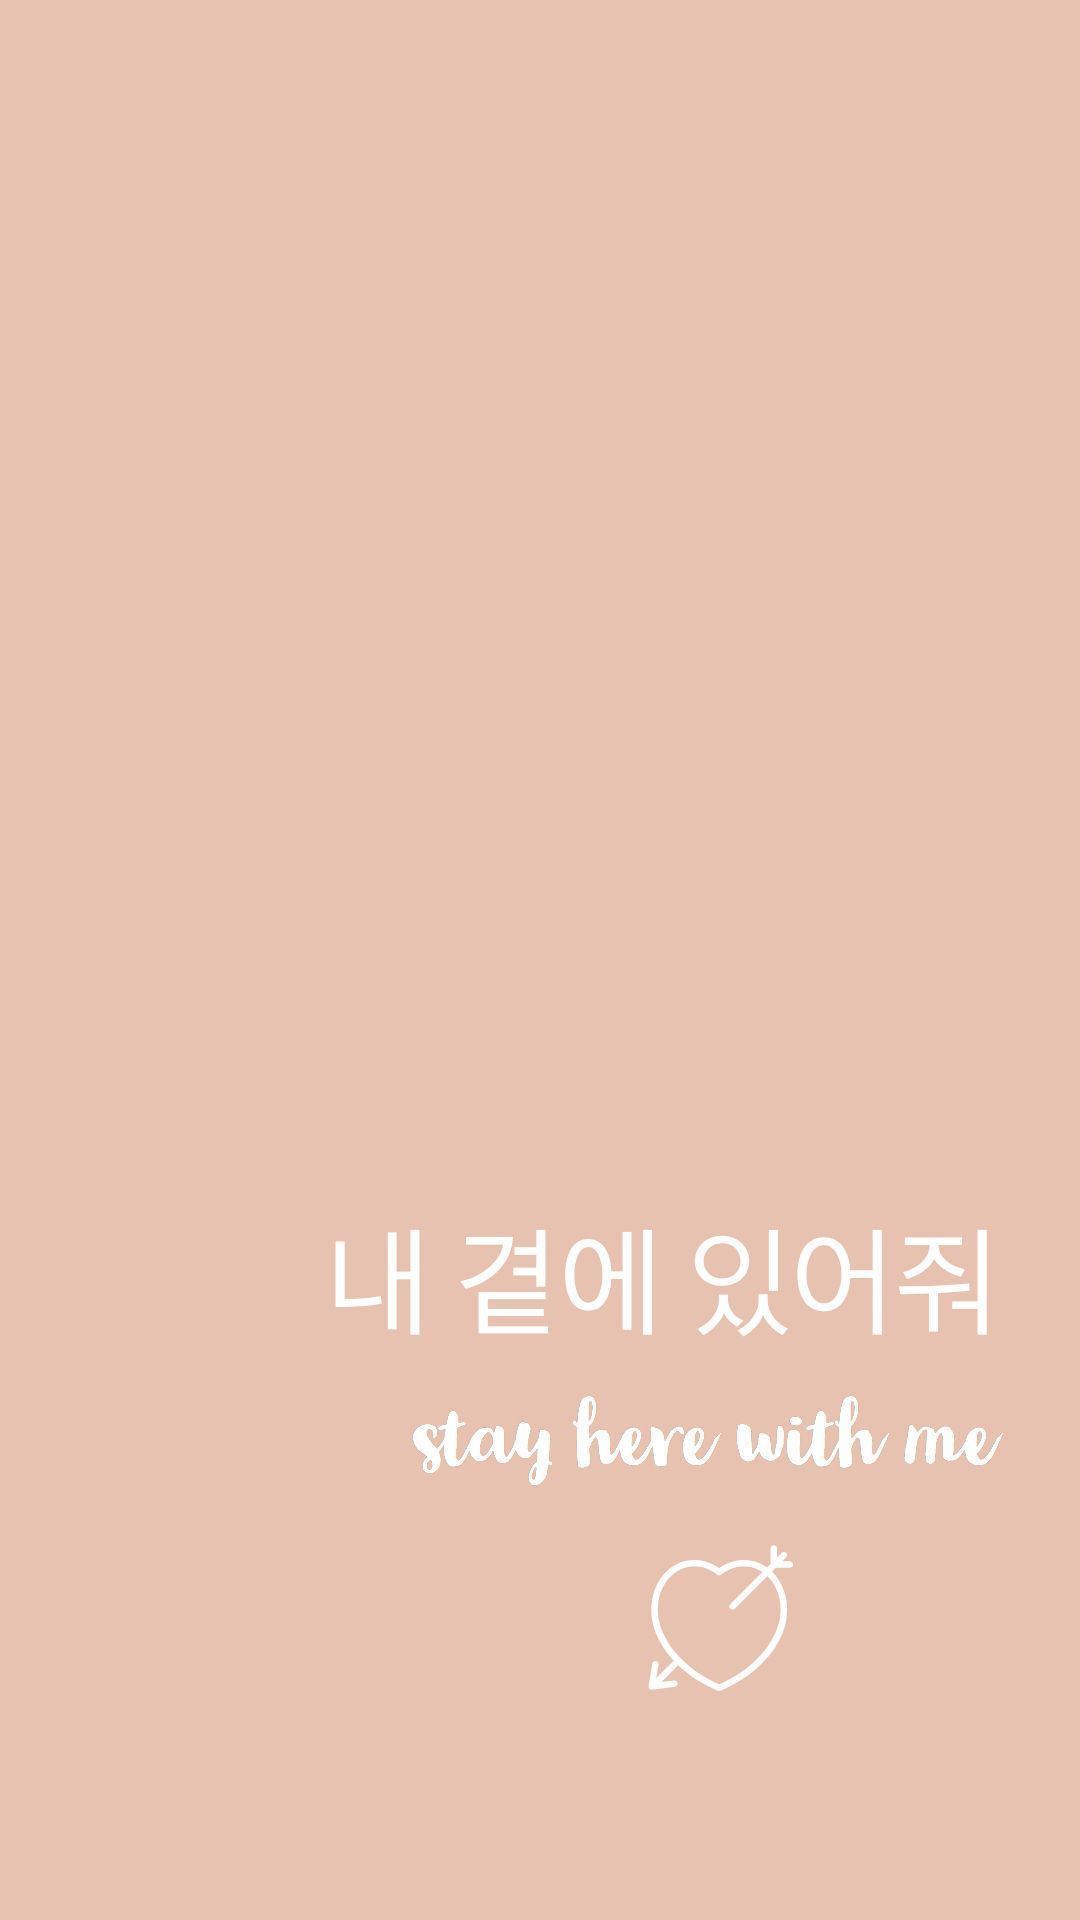 IPhone wallpaper for Kpop fans. This wallpaper is for fans of the kpop boy band, SHINee. The wallpaper is a light pink color with the words 